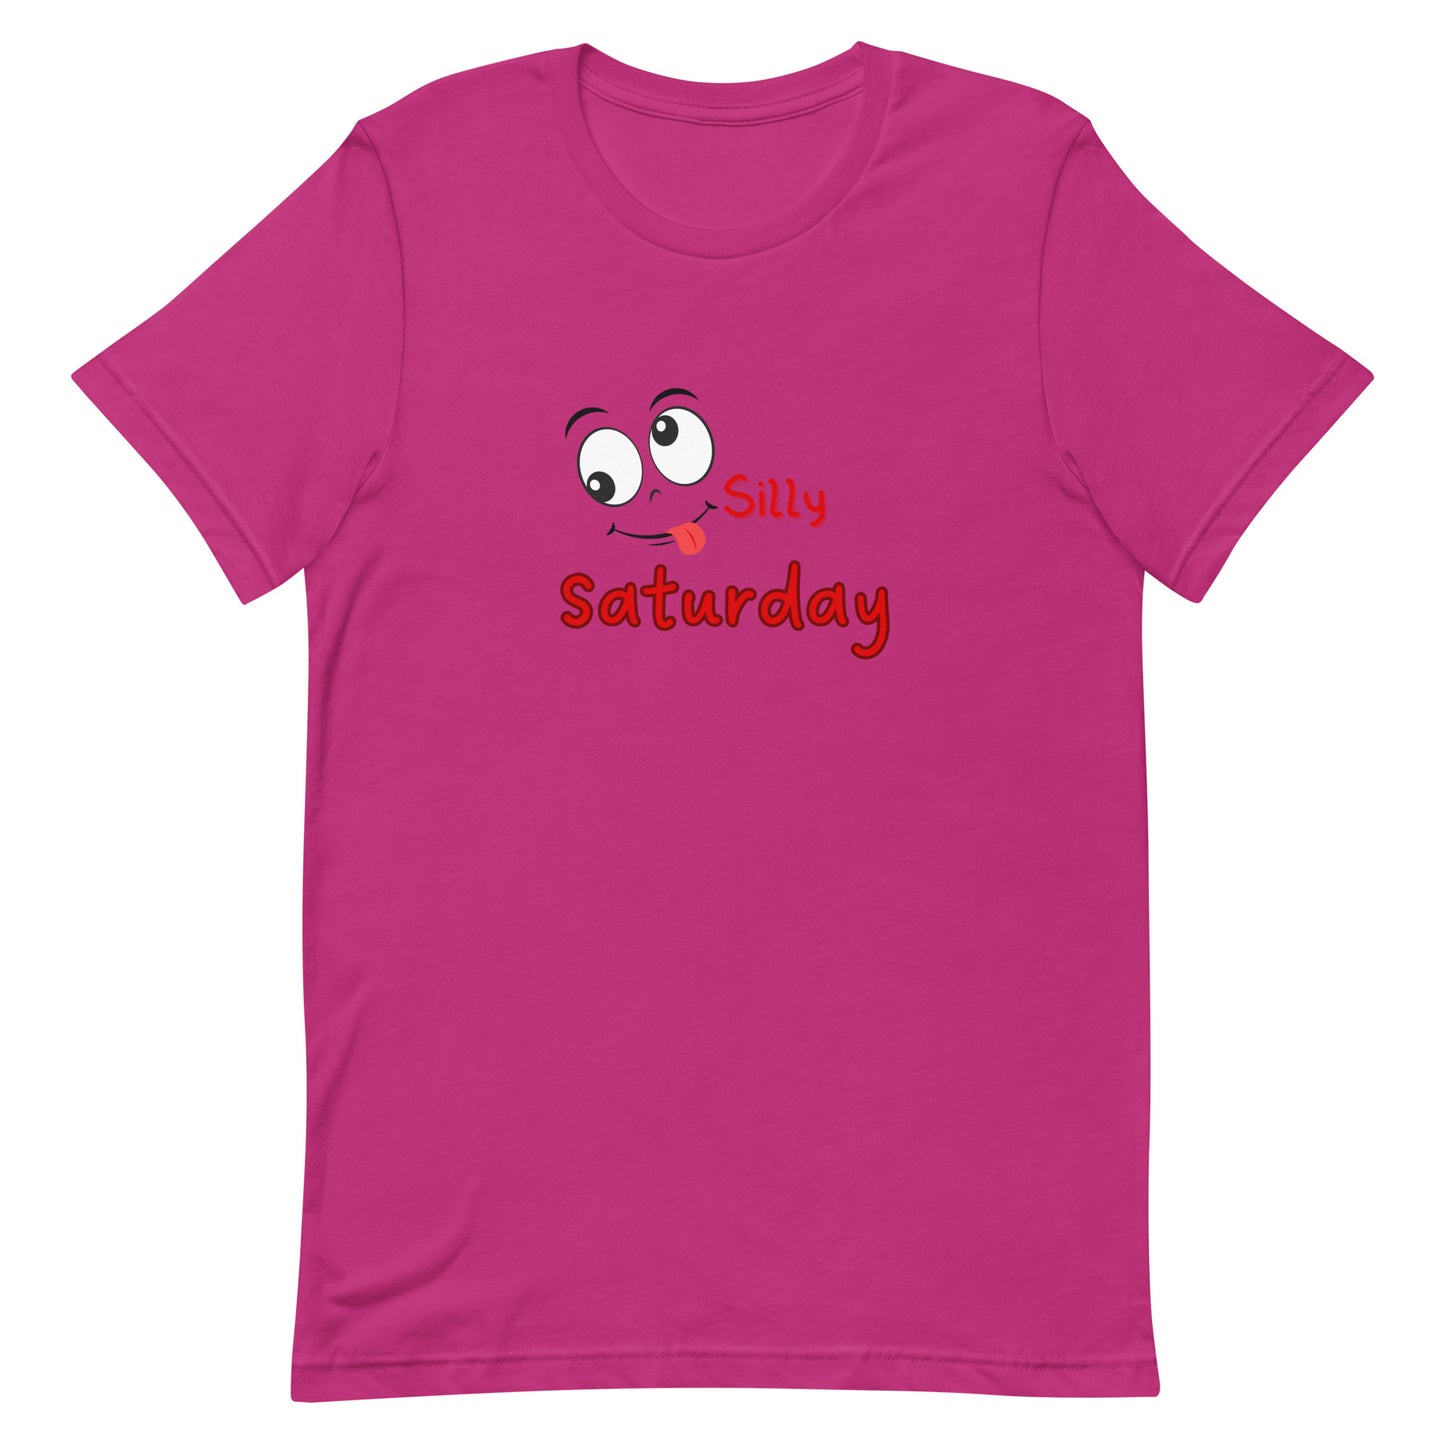 Silly Saturday T-Shirt - Add Laughter to Your Weekend Wardrobe!